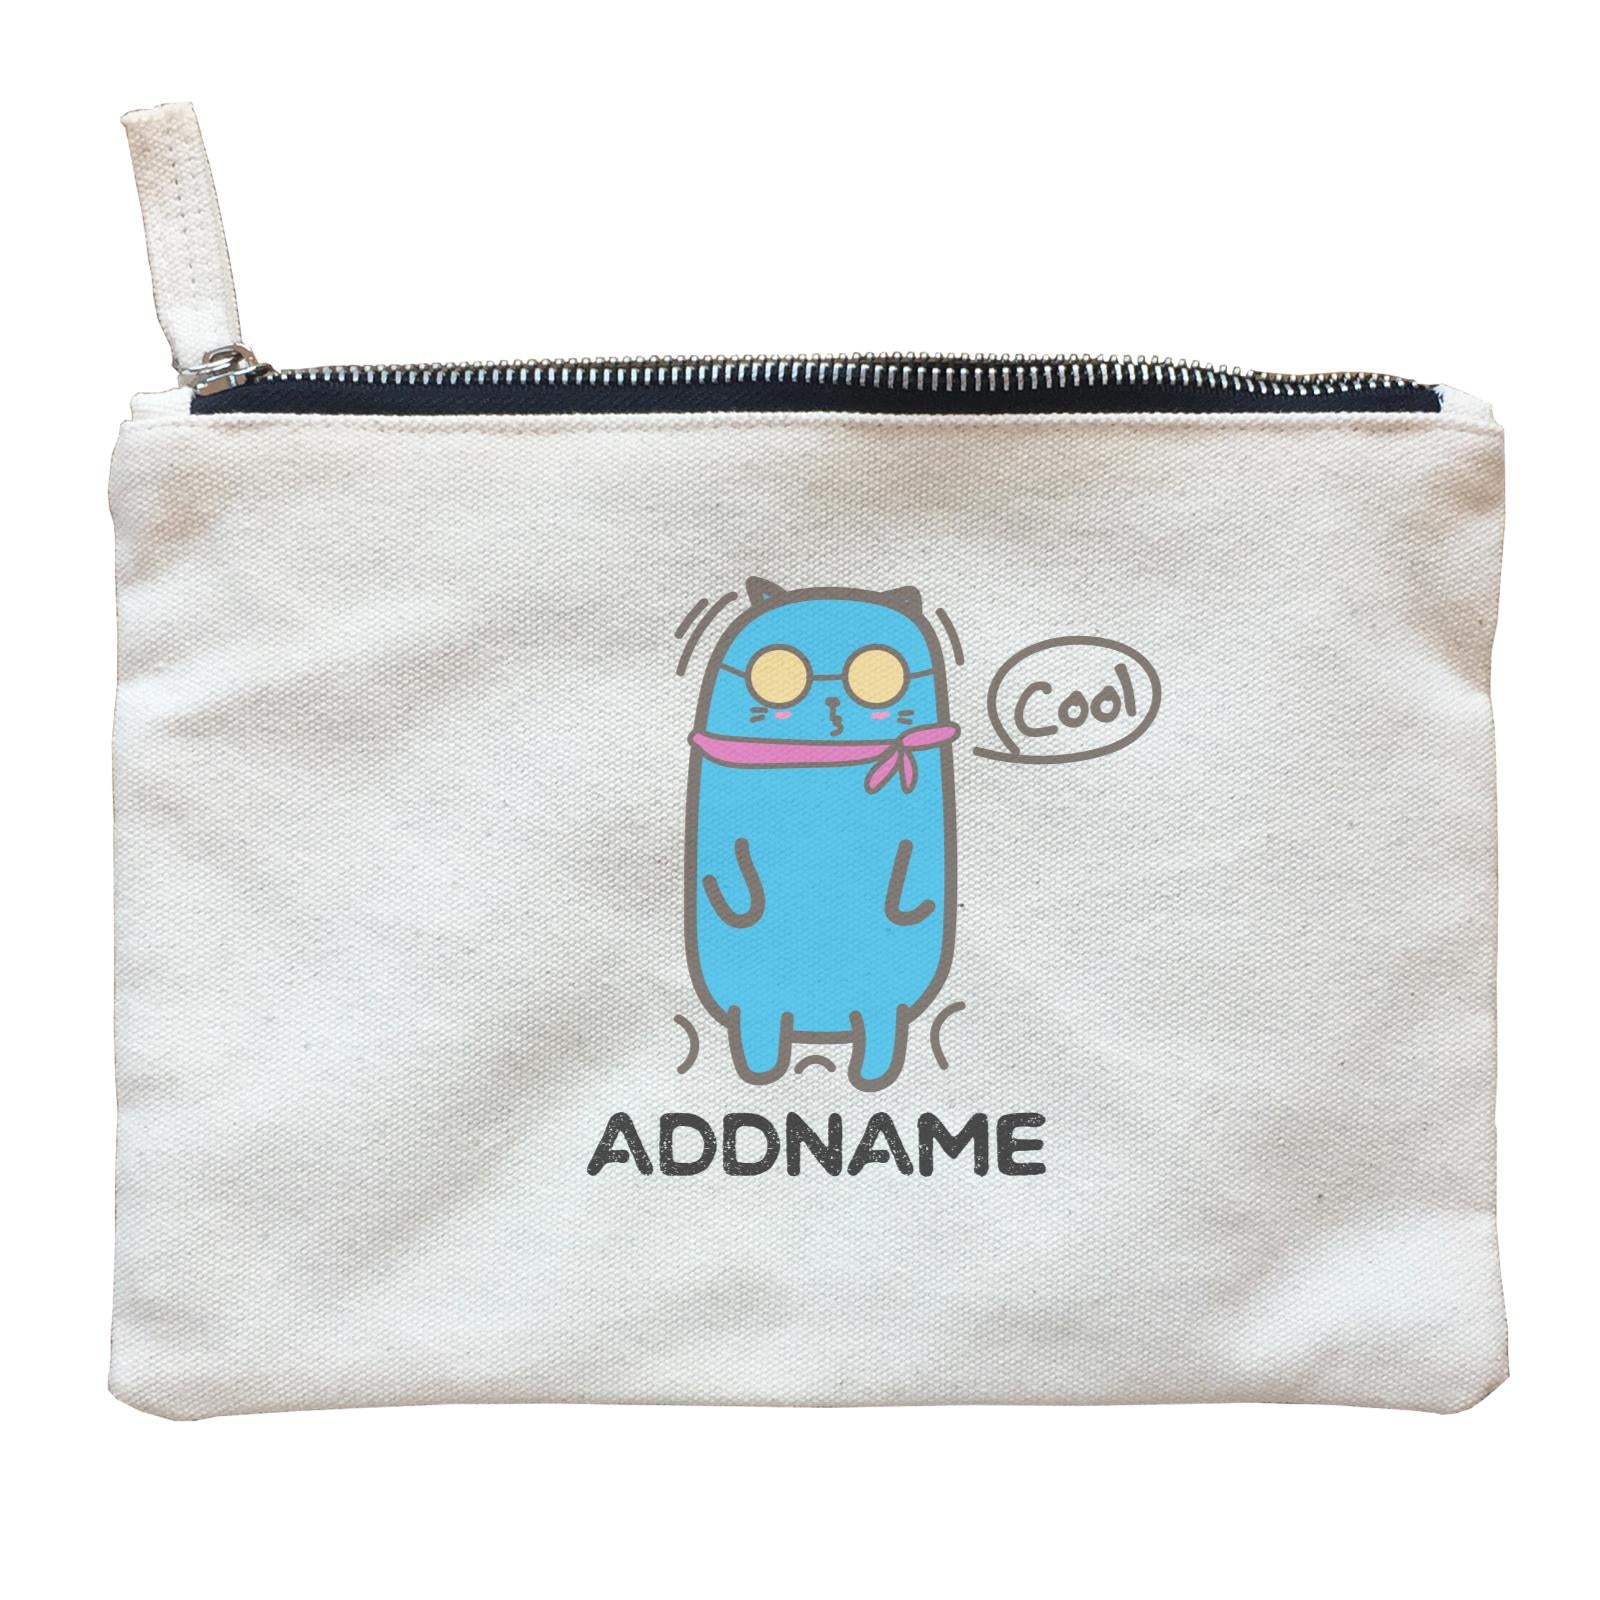 Cute Animals And Friends Series Cool Blue Cat With Sunglasses Addname Zipper Pouch